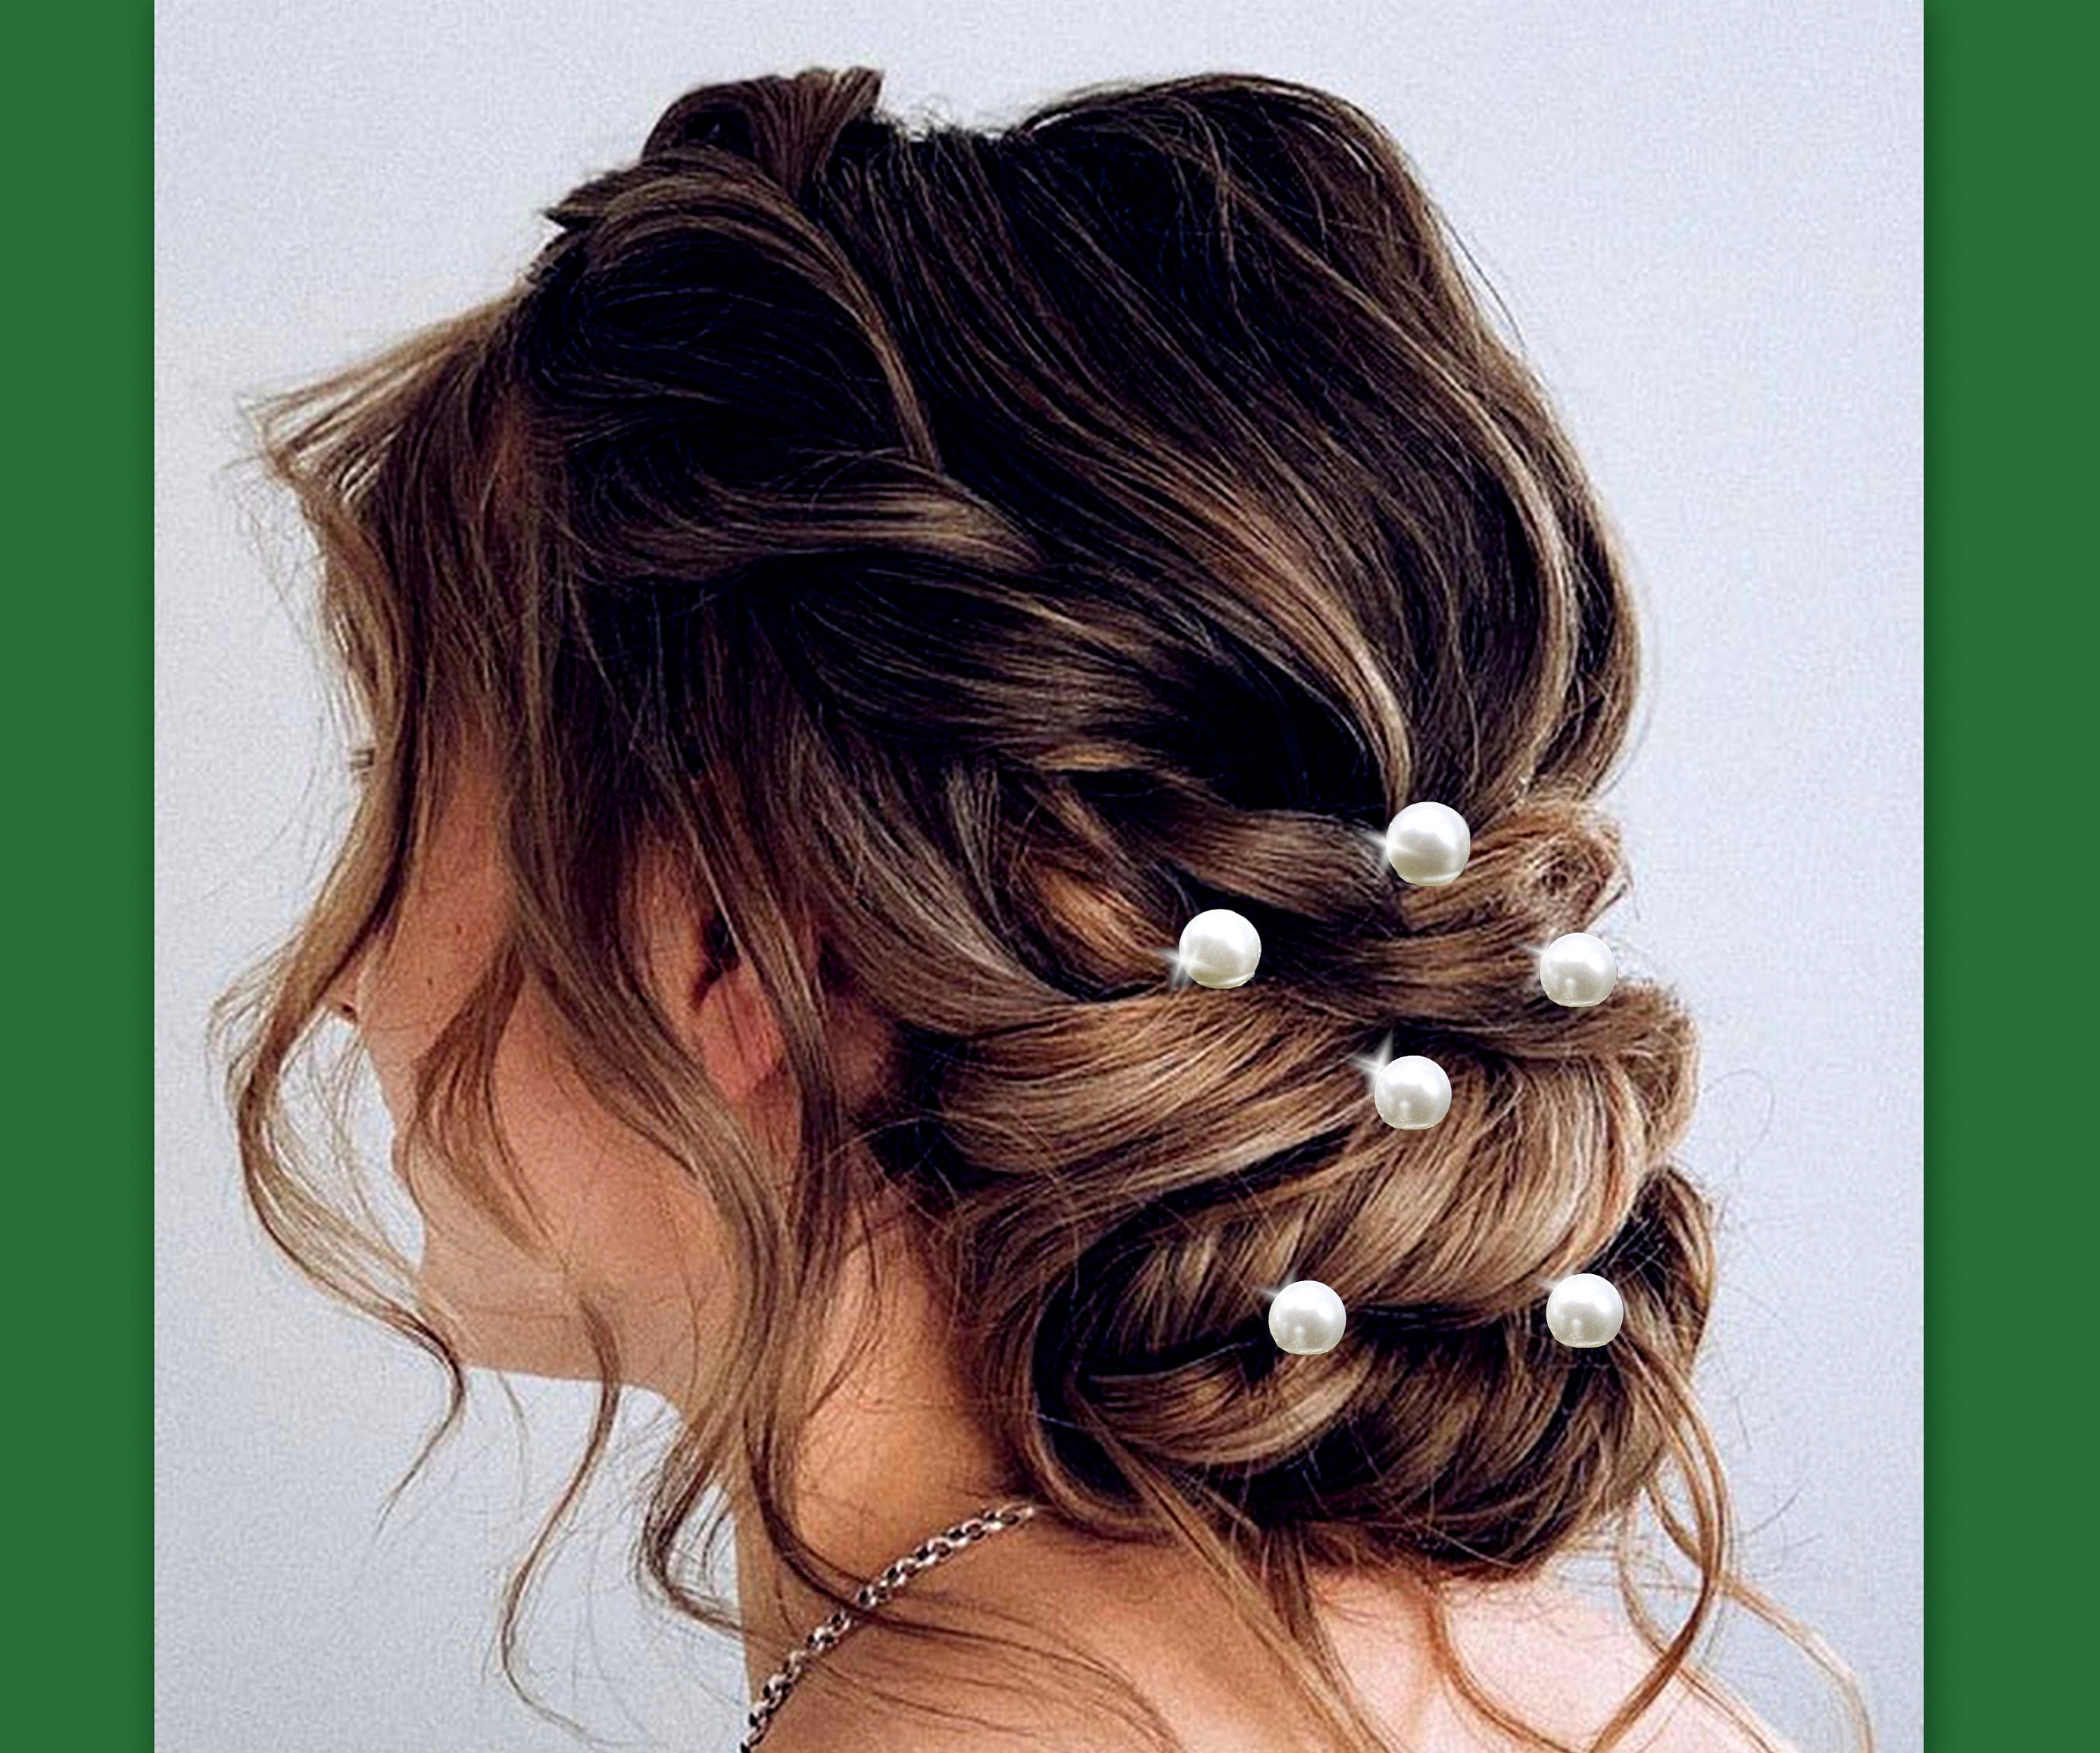 20 Easy Formal Hairstyles for Medium Hair To Try Out | Styles At Life